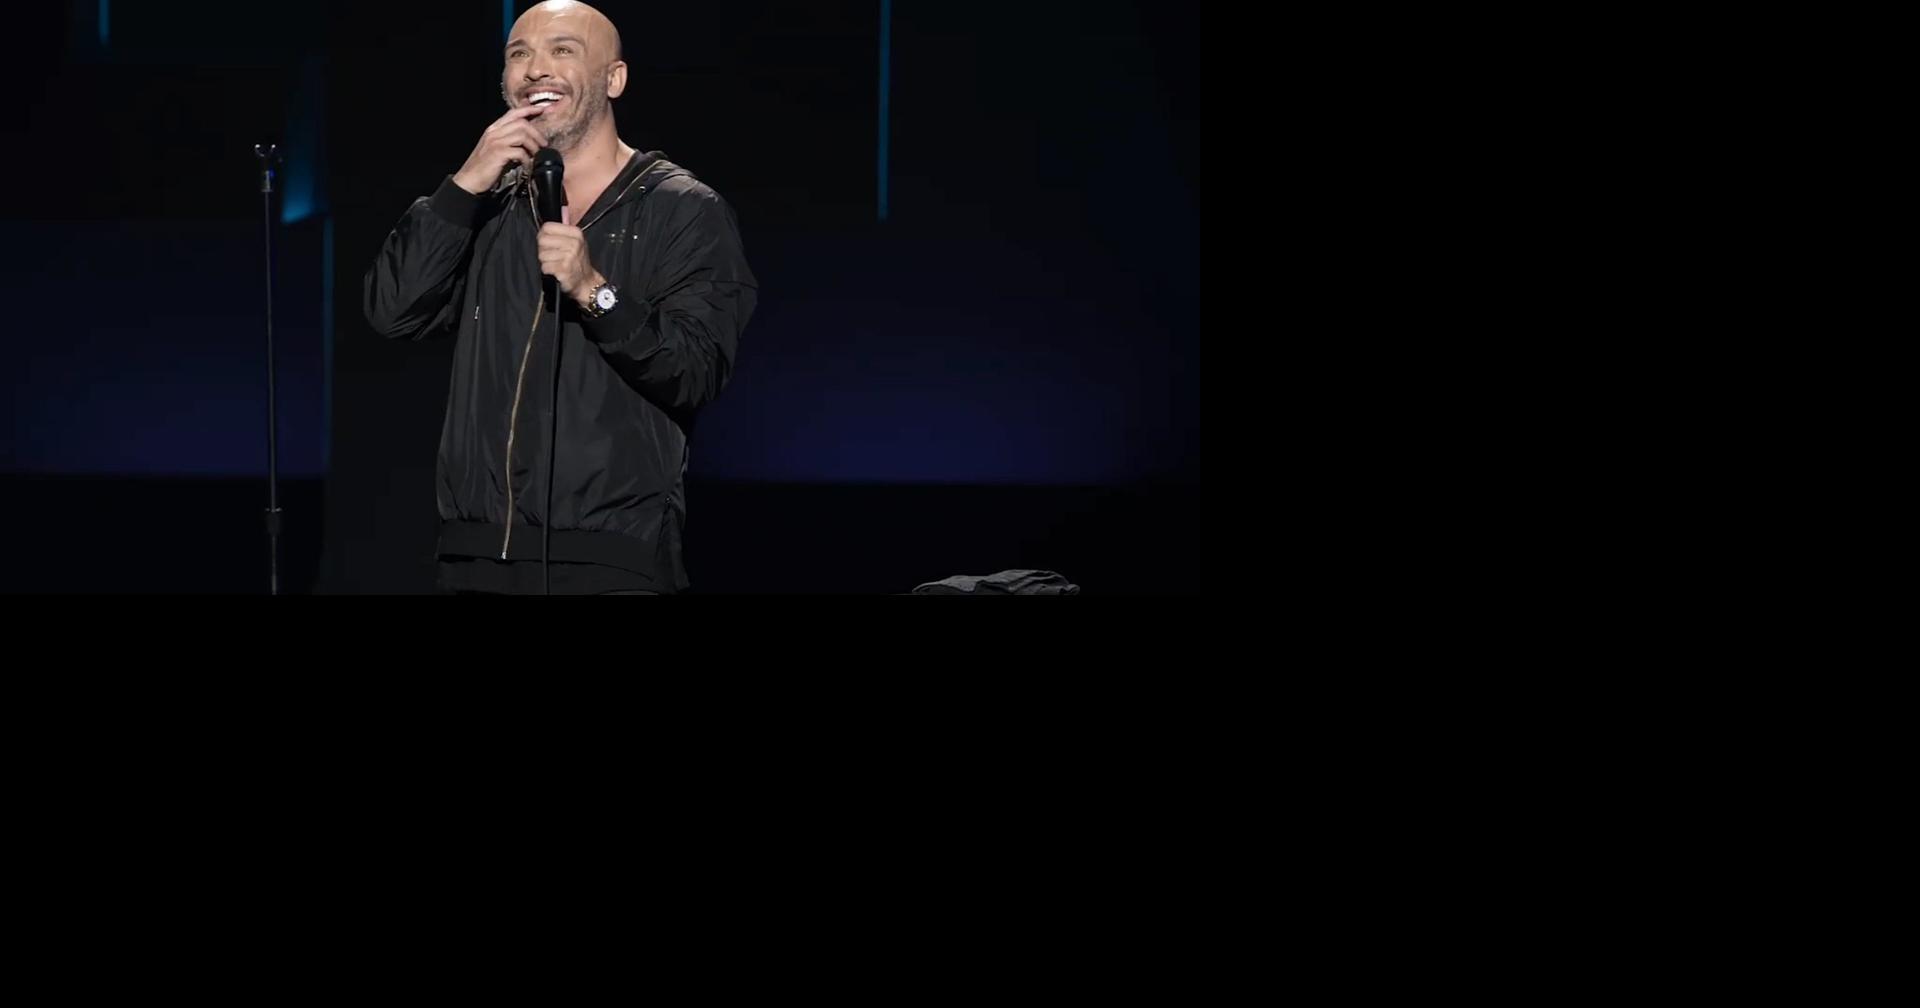 Comedian Jo Koy will bring new tour to Colorado Springs